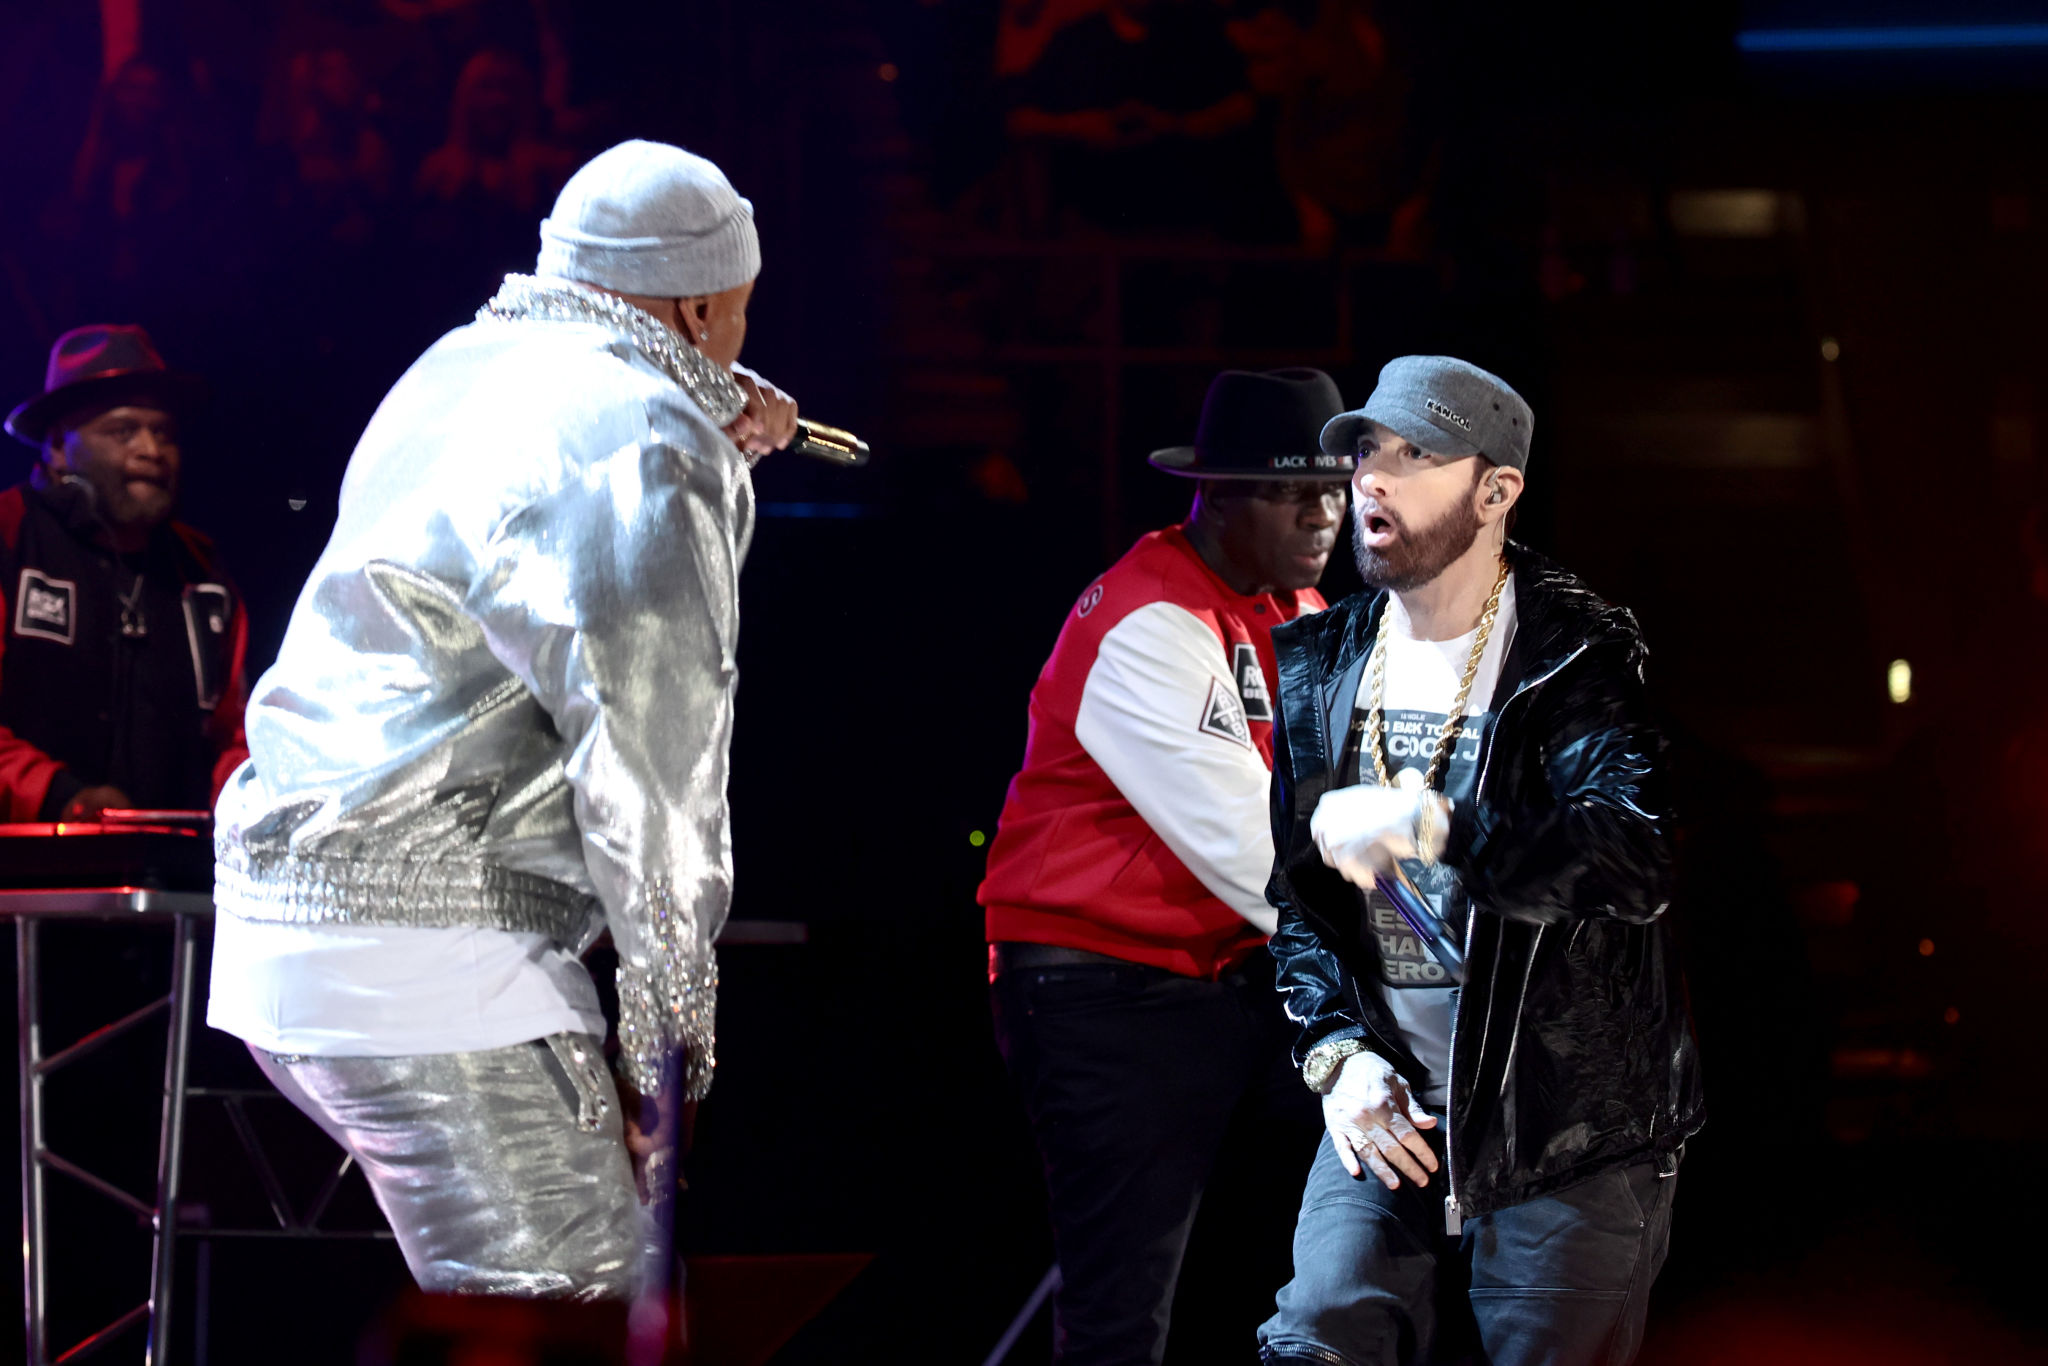 CLEVELAND, OHIO - OCTOBER 30: LL Cool J and Eminem perform onstage during the 36th Annual Rock & Roll Hall Of Fame Induction Ceremony at Rocket Mortgage Fieldhouse on October 30, 2021 in Cleveland, Ohio. (Photo by Dimitrios Kambouris/Getty Images for The Rock and Roll Hall of Fame )